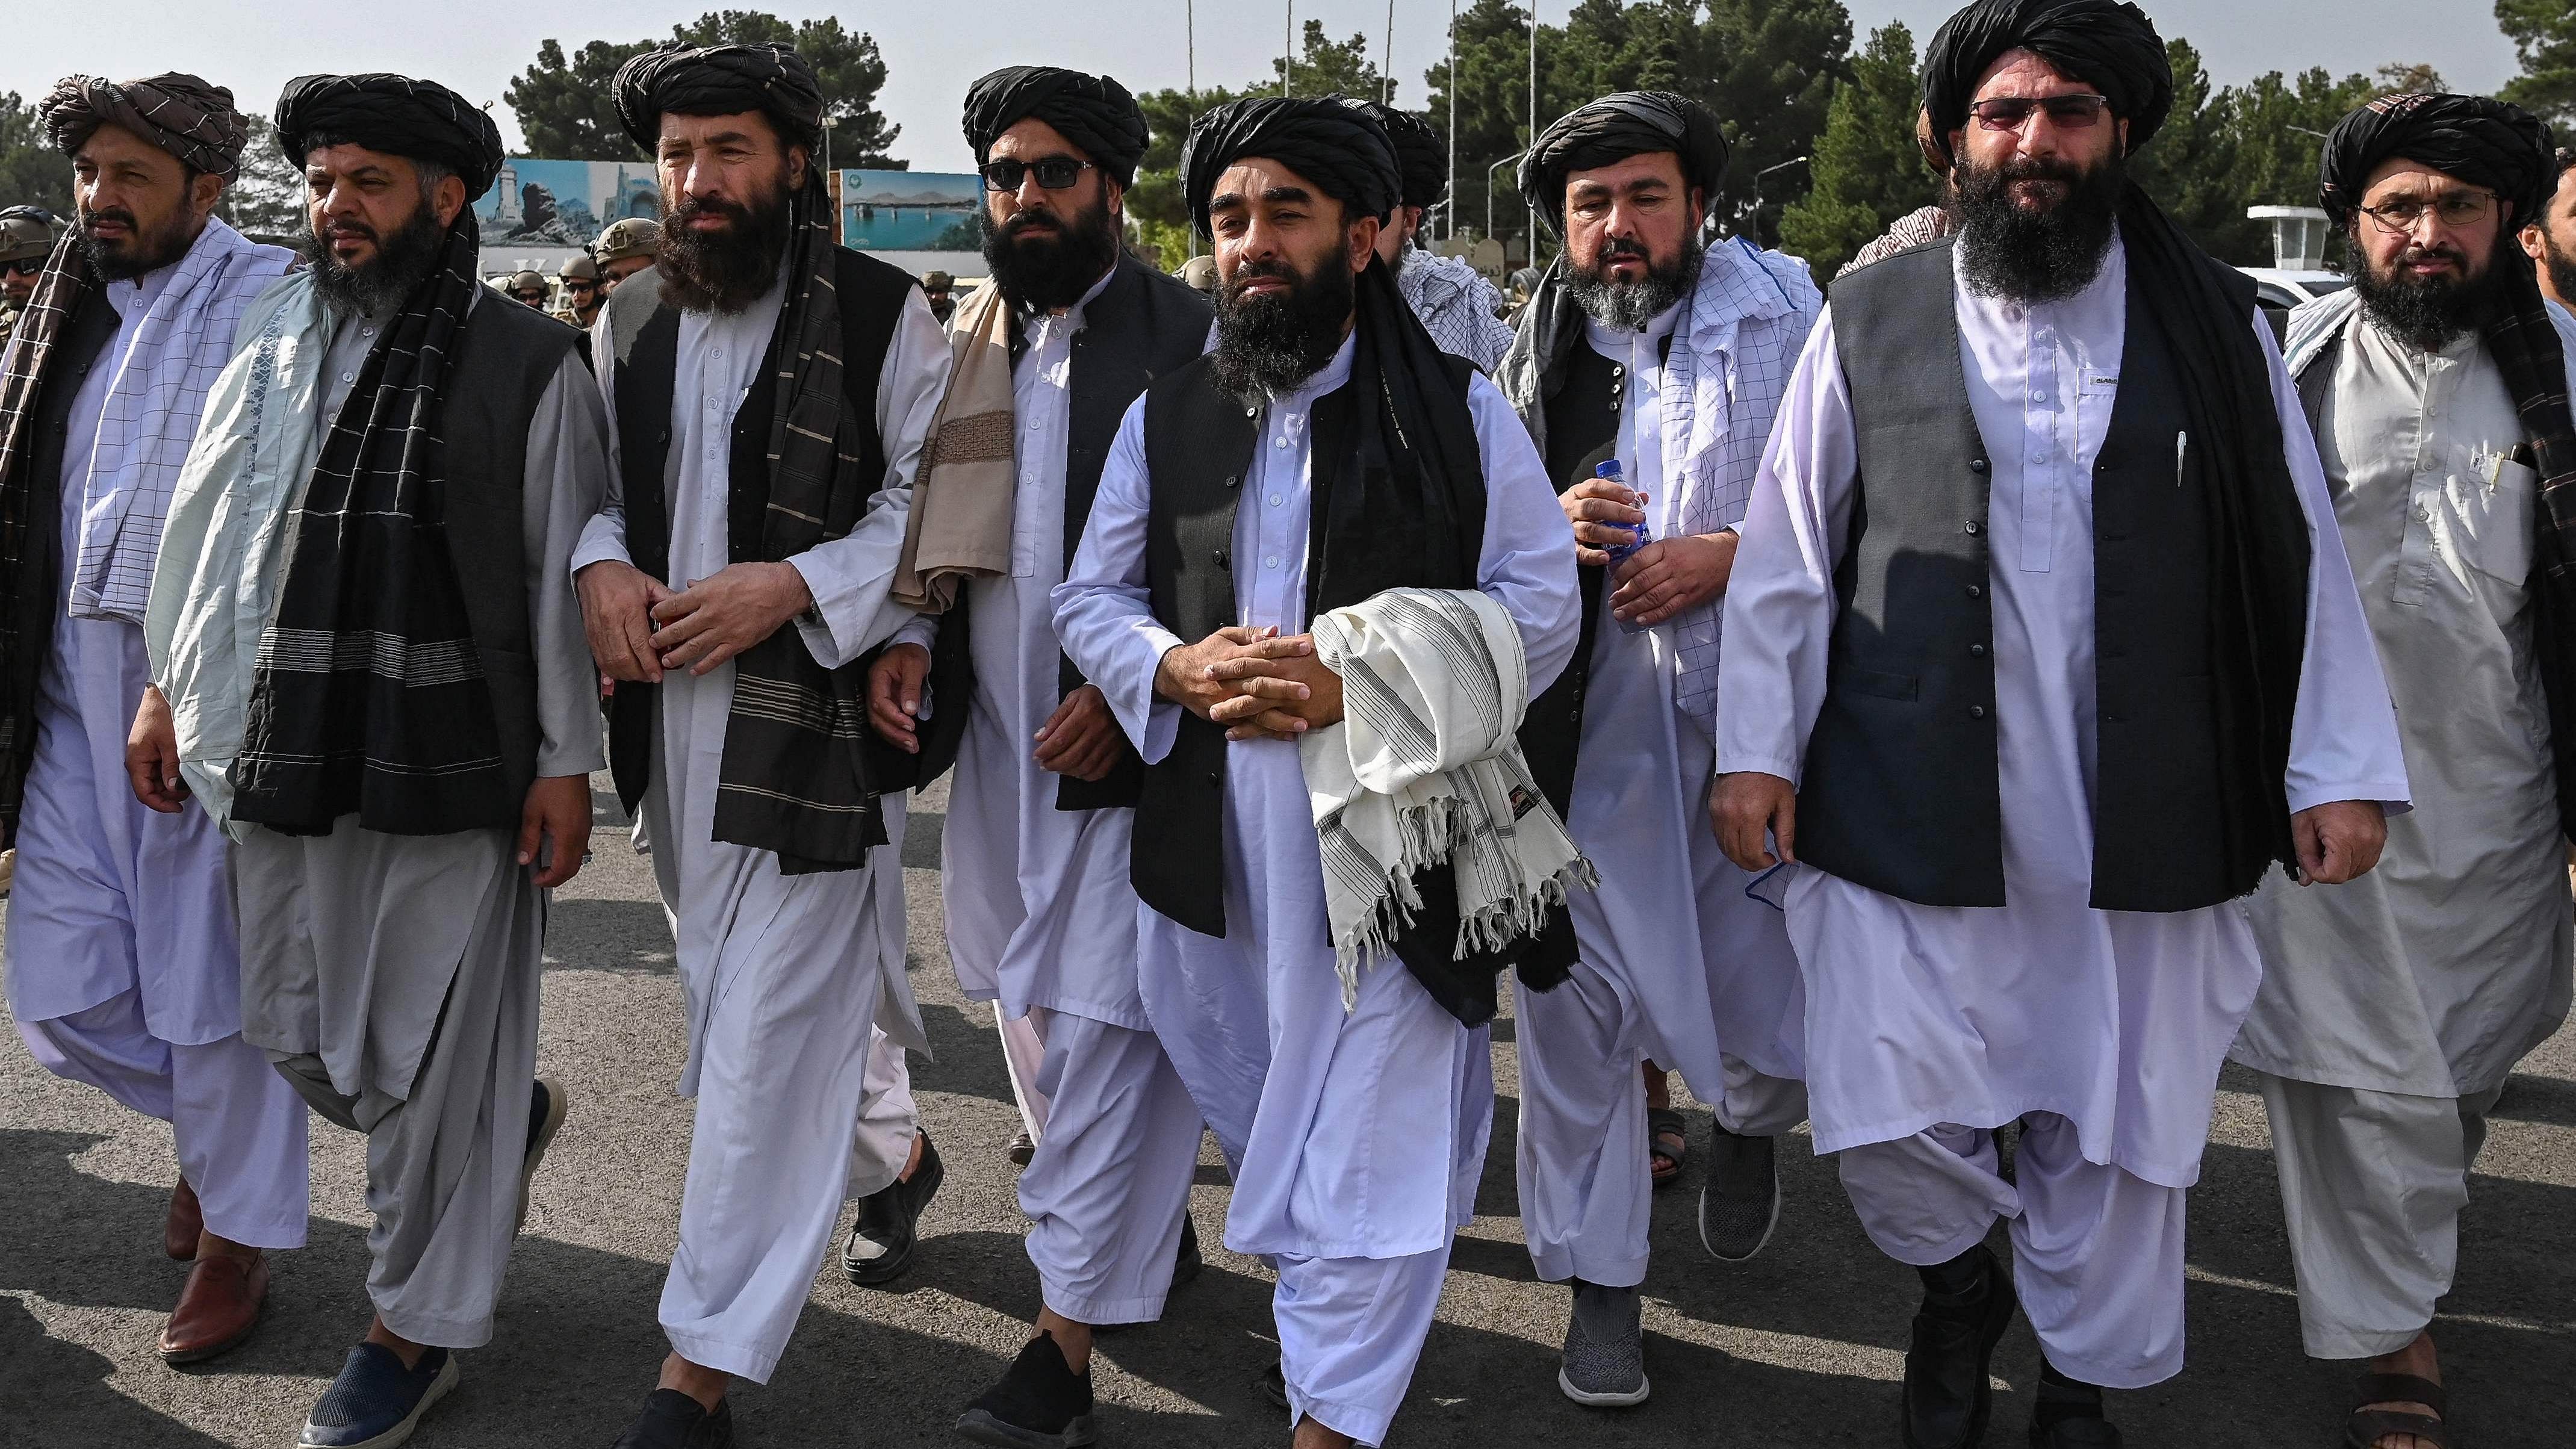 Taliban spokesman Zabihullah Mujahid (C, holding shawl) arrives as he is accompanied by officials to address a media conference. Credit: AFP File Photo